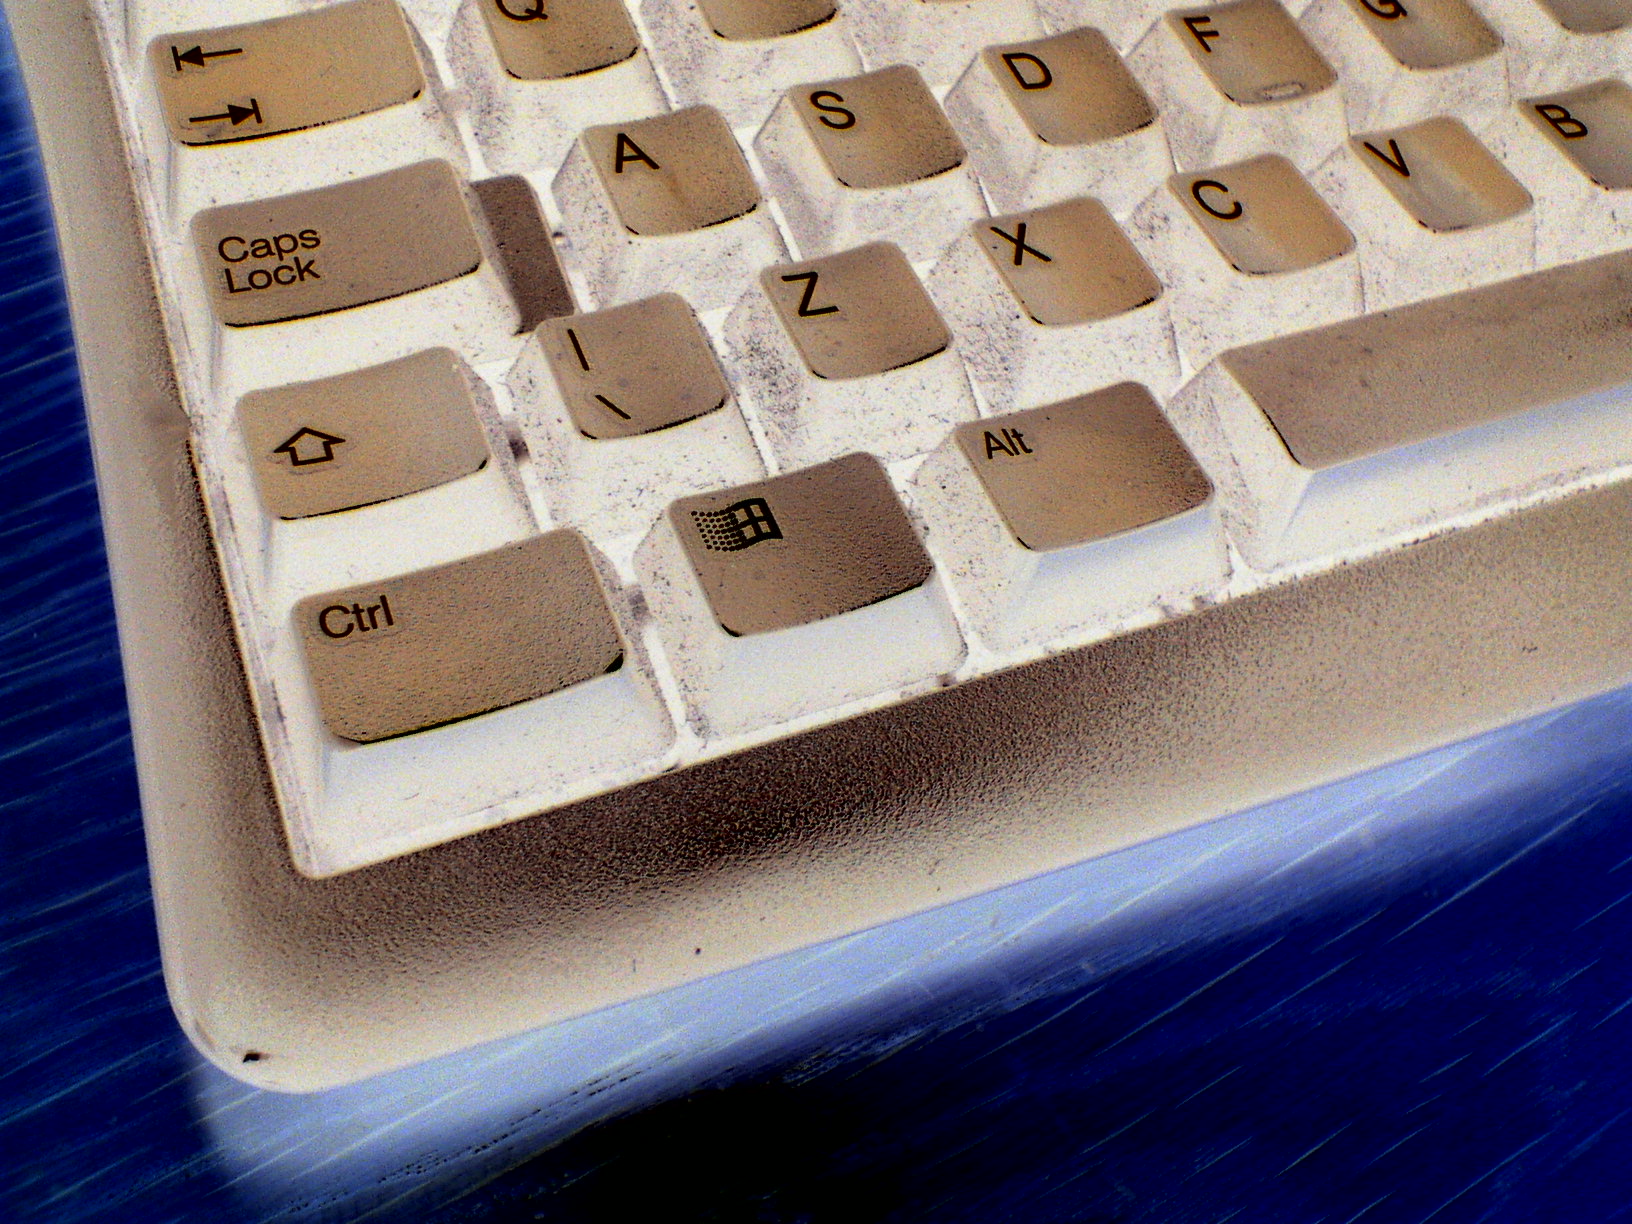 a po of the key board for a computer